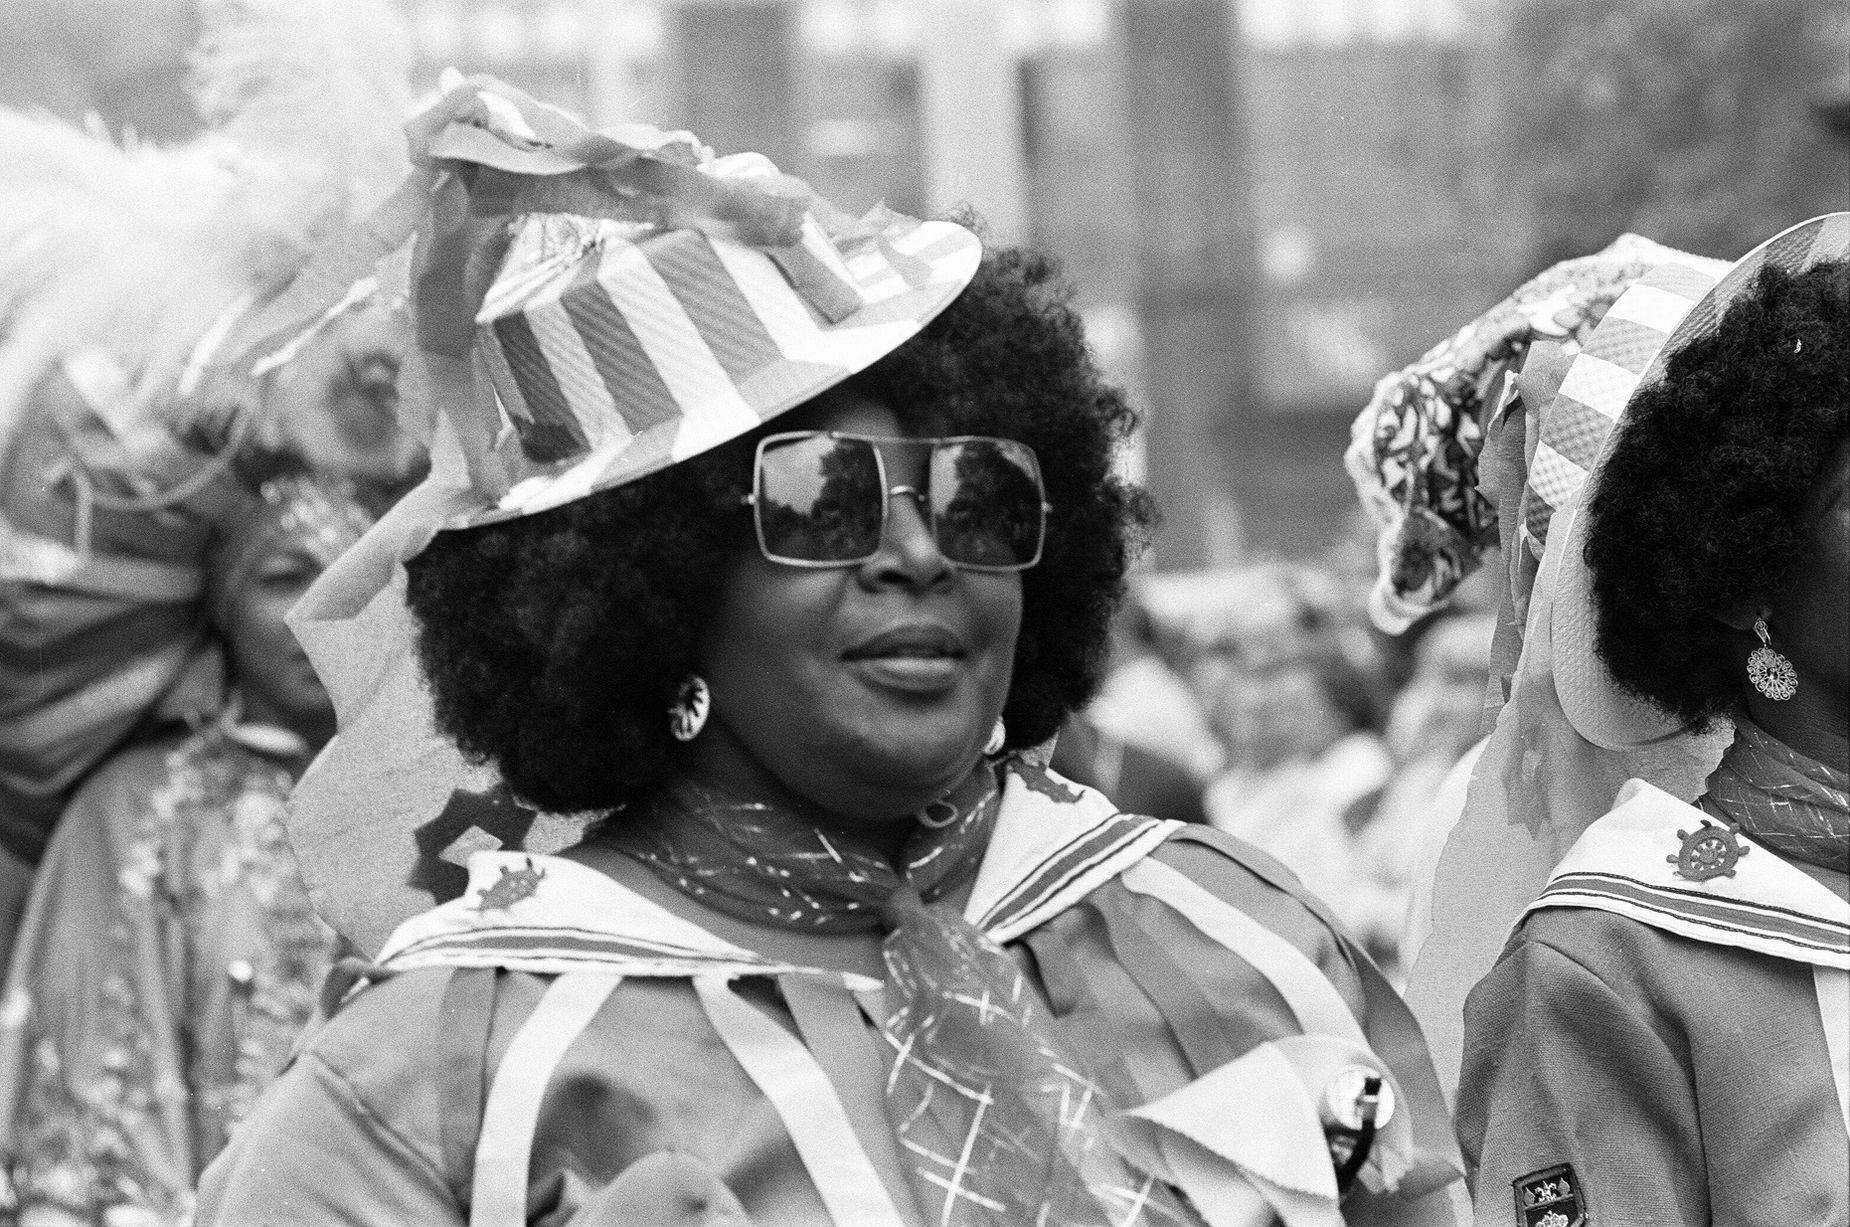 Lady with afro hair and a fancy hat and sunglasses smiles during the carnival.